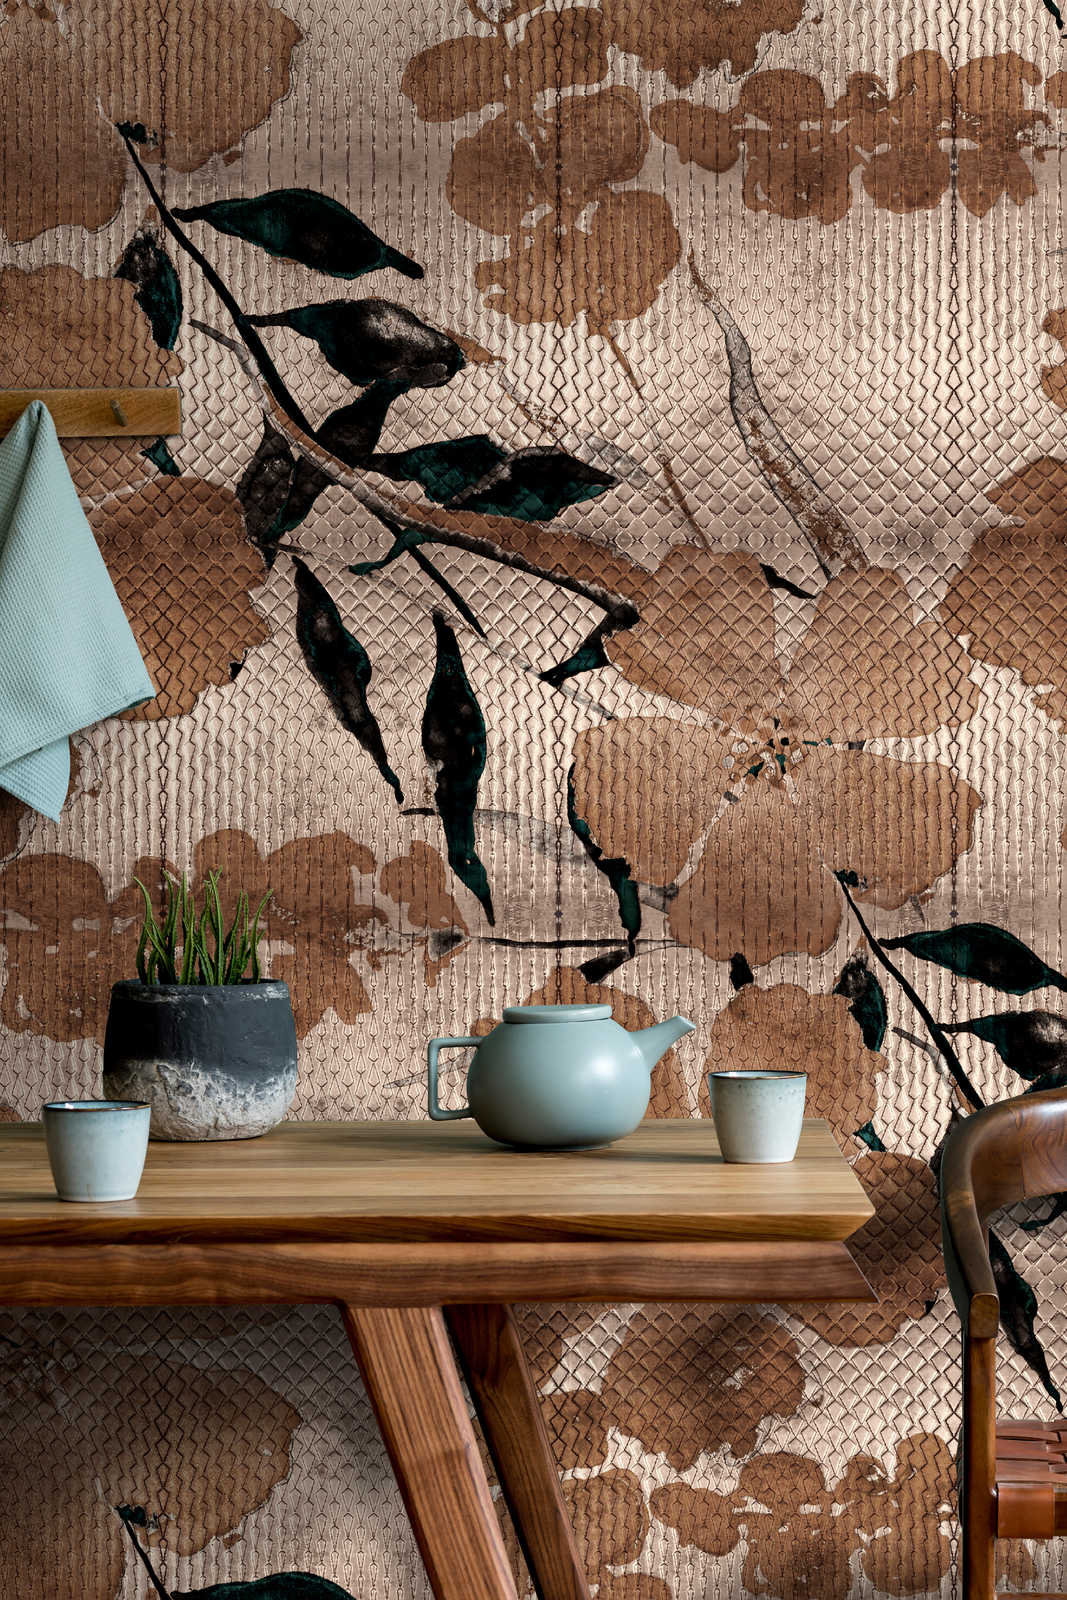             Odessa 2 - metallic wall mural with cherry blossom pattern in copper
        